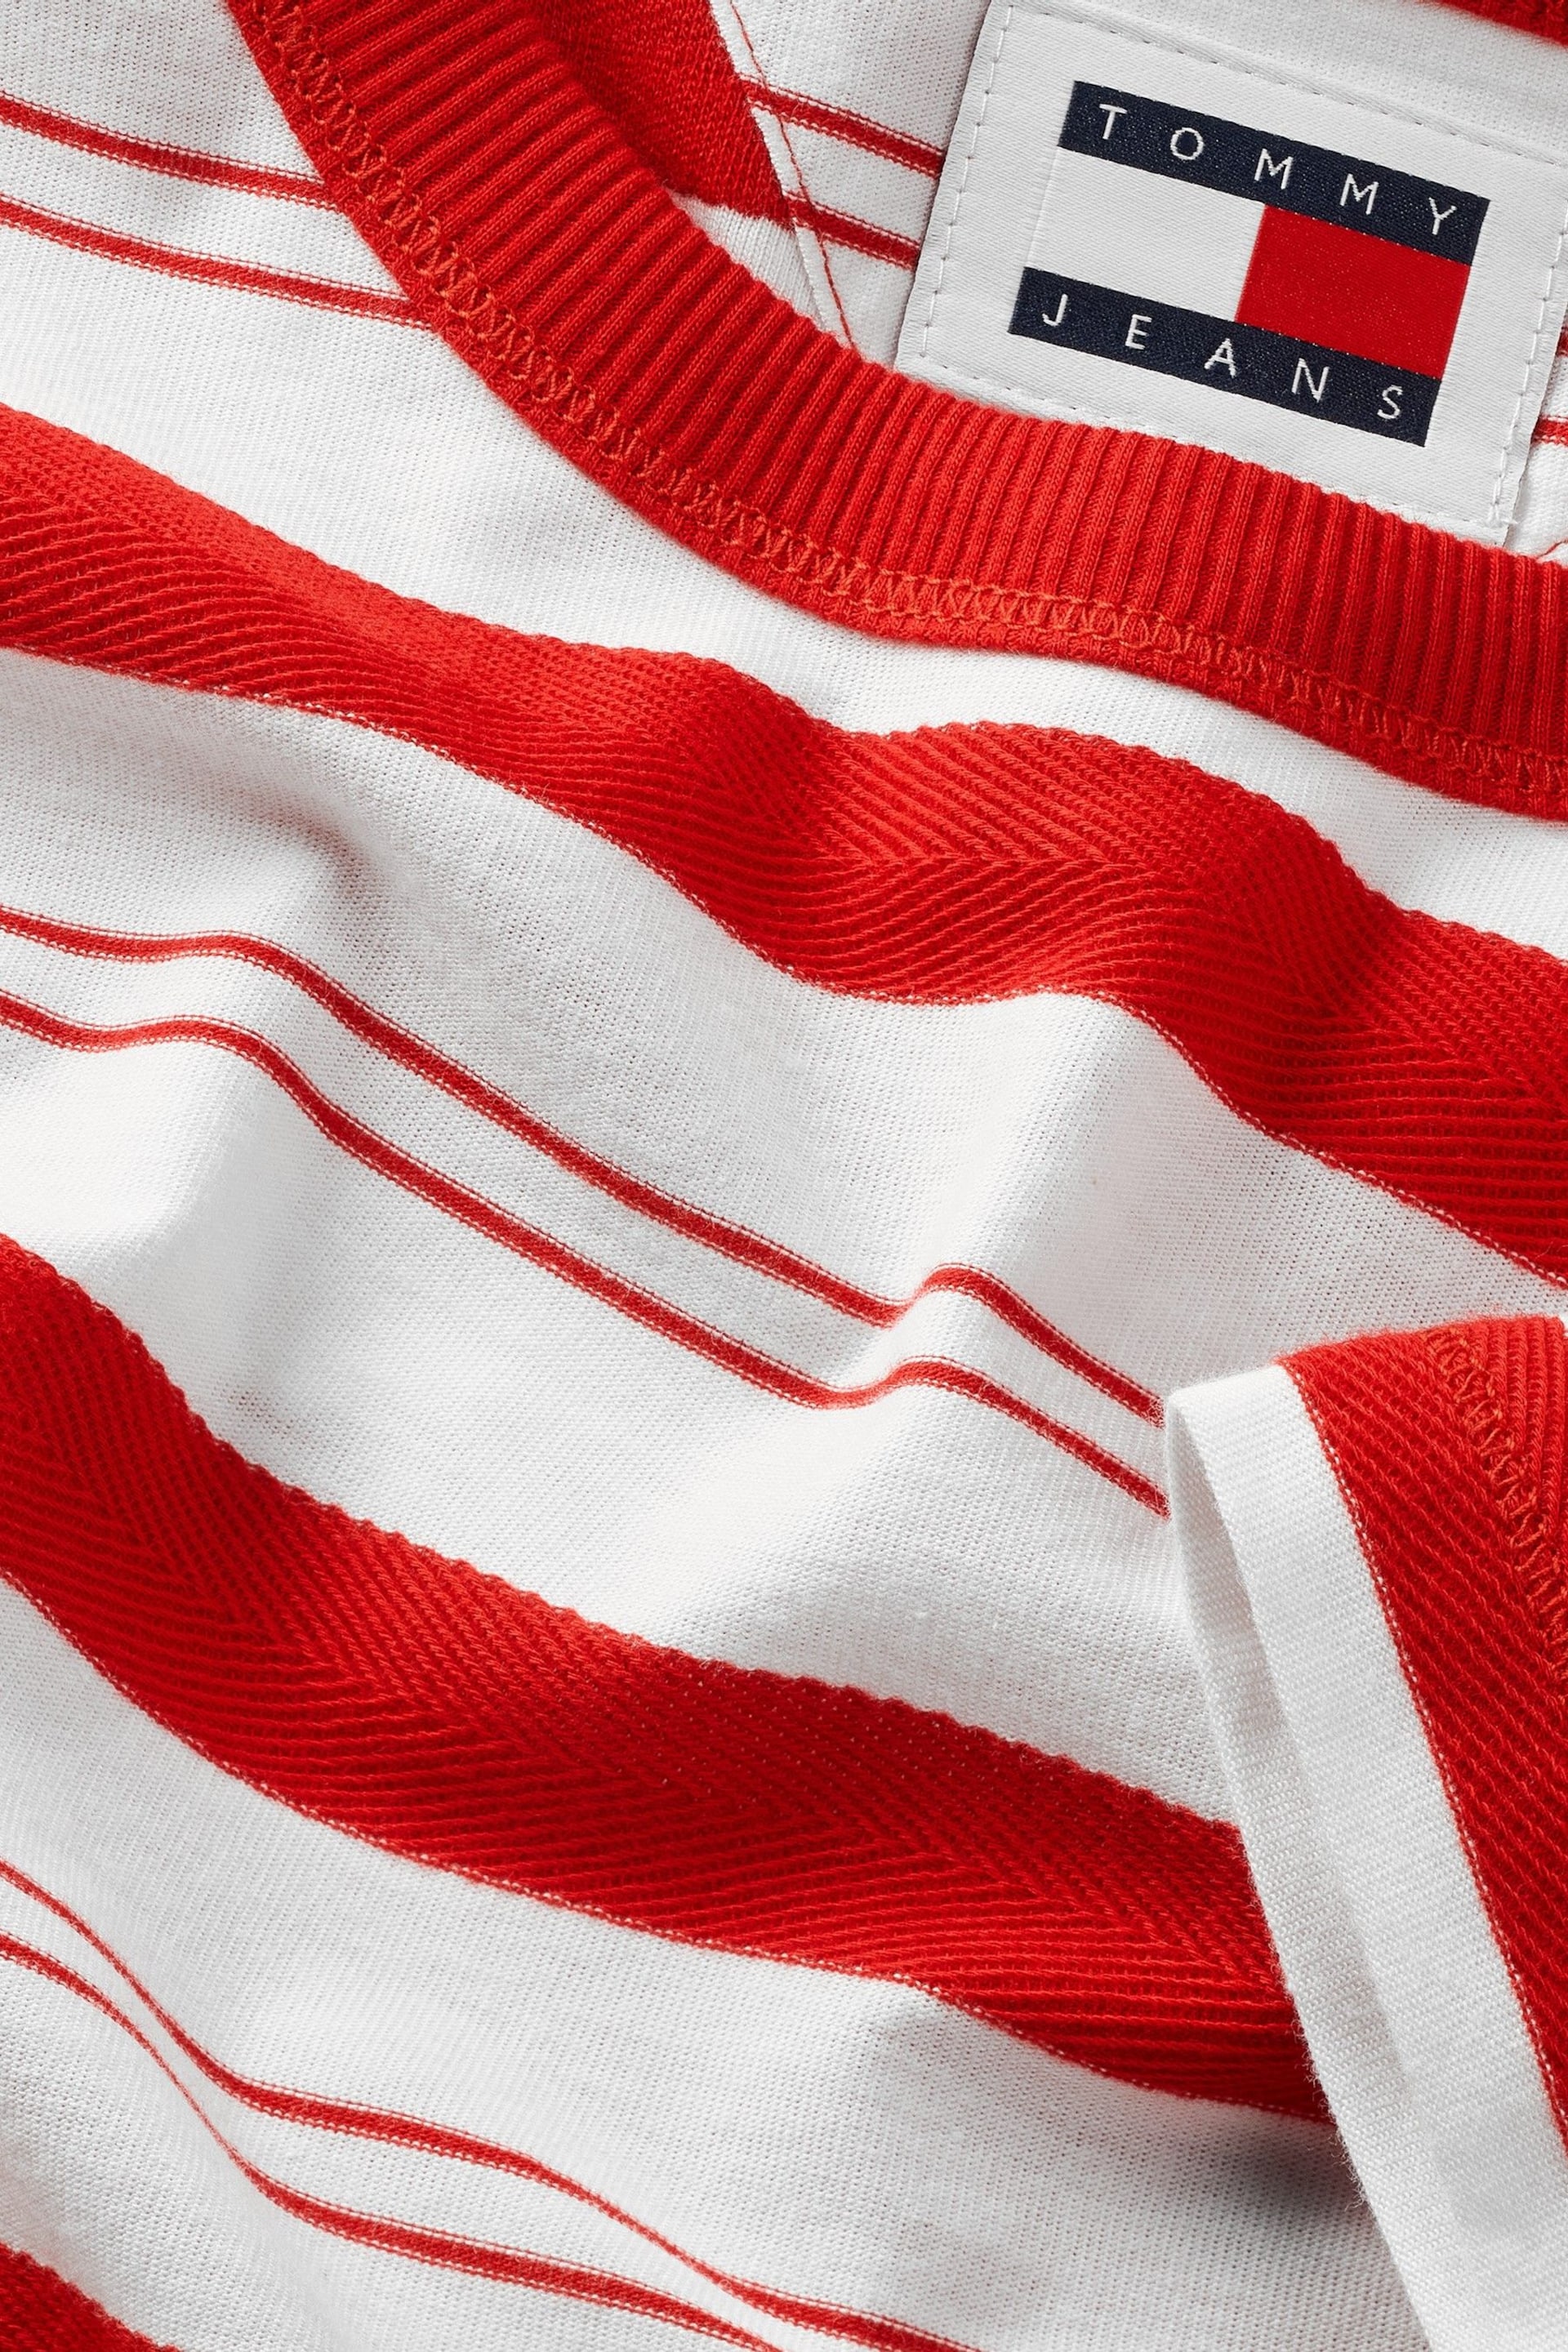 Tommy Jeans Red Stripe T-Shirt - Image 8 of 8